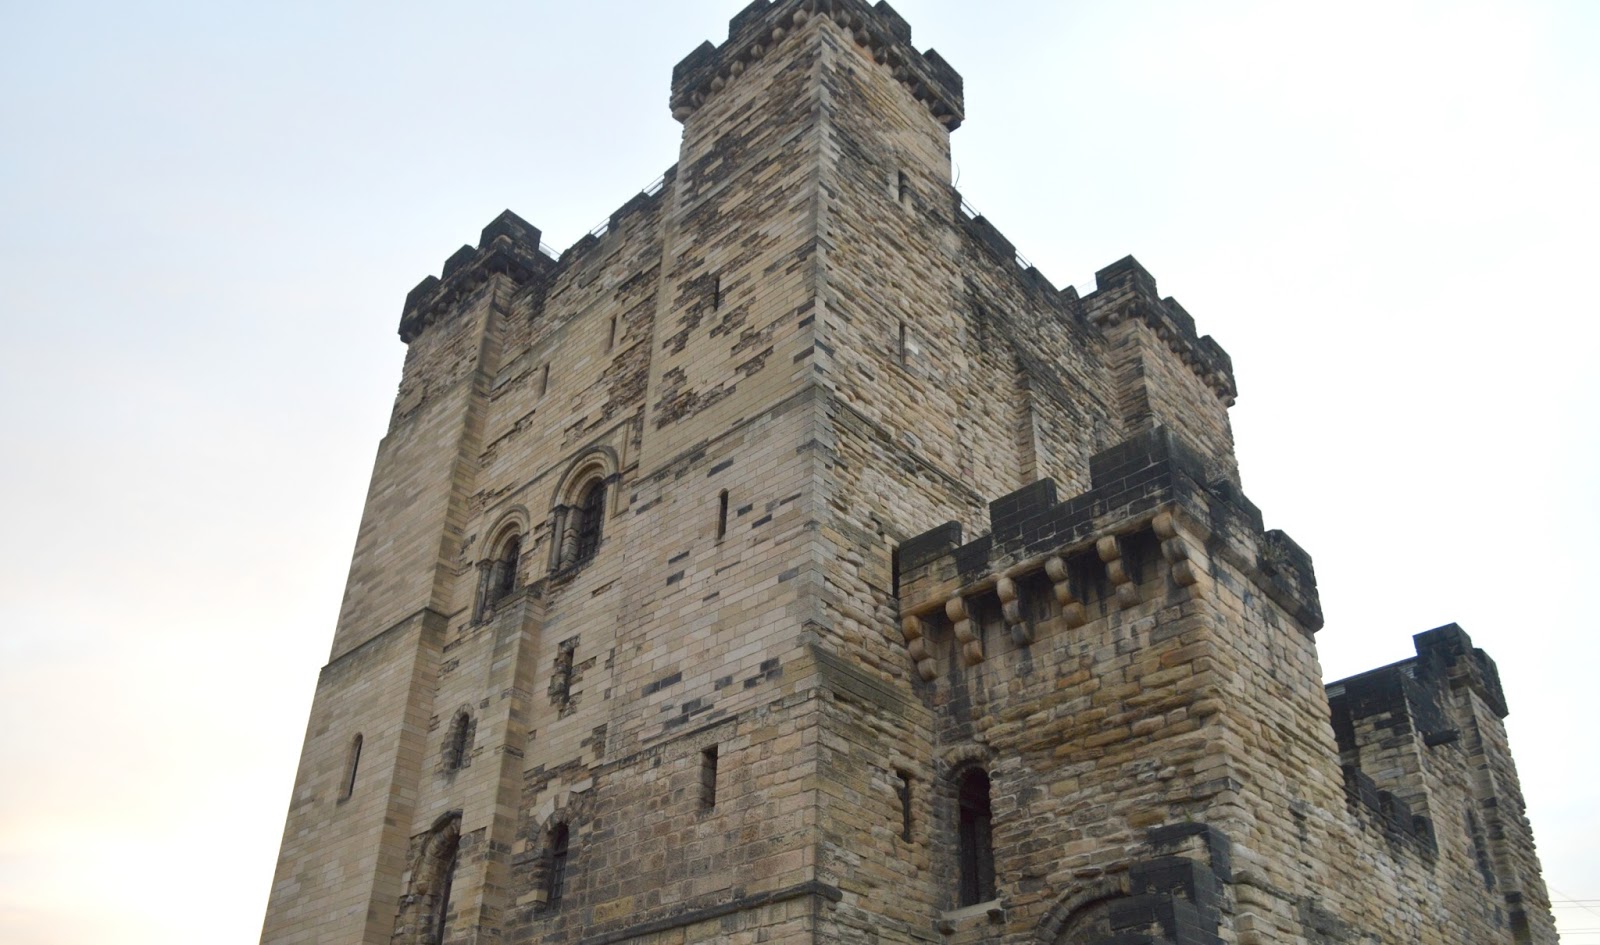 Experimental Diner - Dining at Newcastle Castle with Simon Hicks of The Lord Crewe Arms